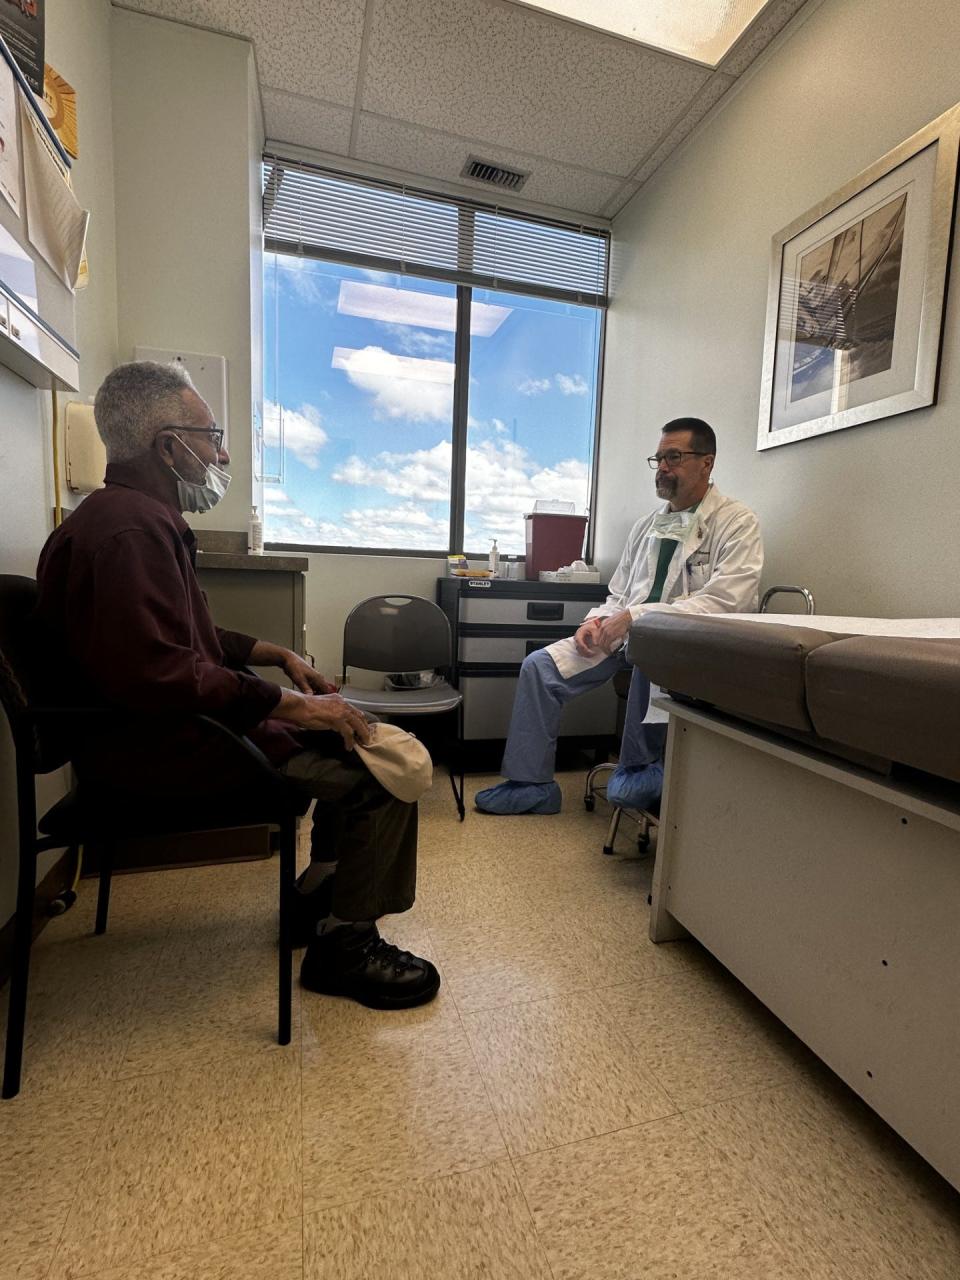 John Parker, left, checks in with his urologist Dr.William Bingham, following his Aquablation procedure at St.Francis. Parker credits the procedure with alleviating the uncomfortable symptoms associated with an enlarged prostate.